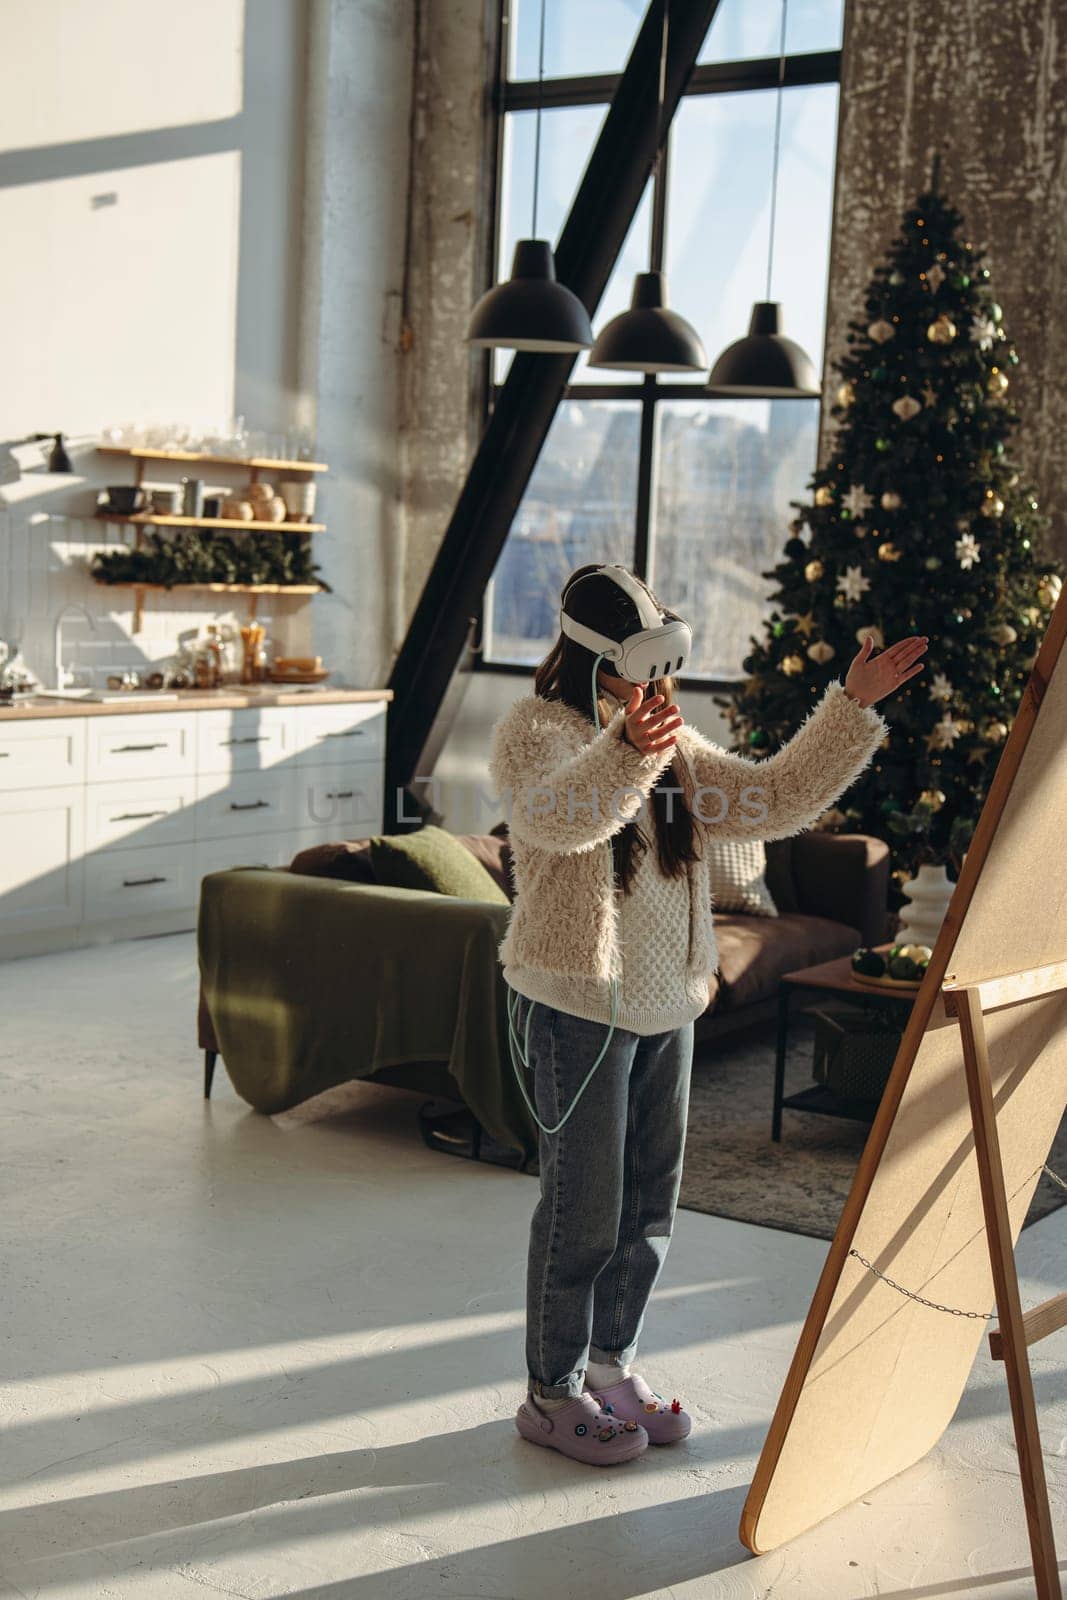 With the Christmas mood around, a young woman in light clothing and a virtual reality headset stands before the mirror. High quality photo